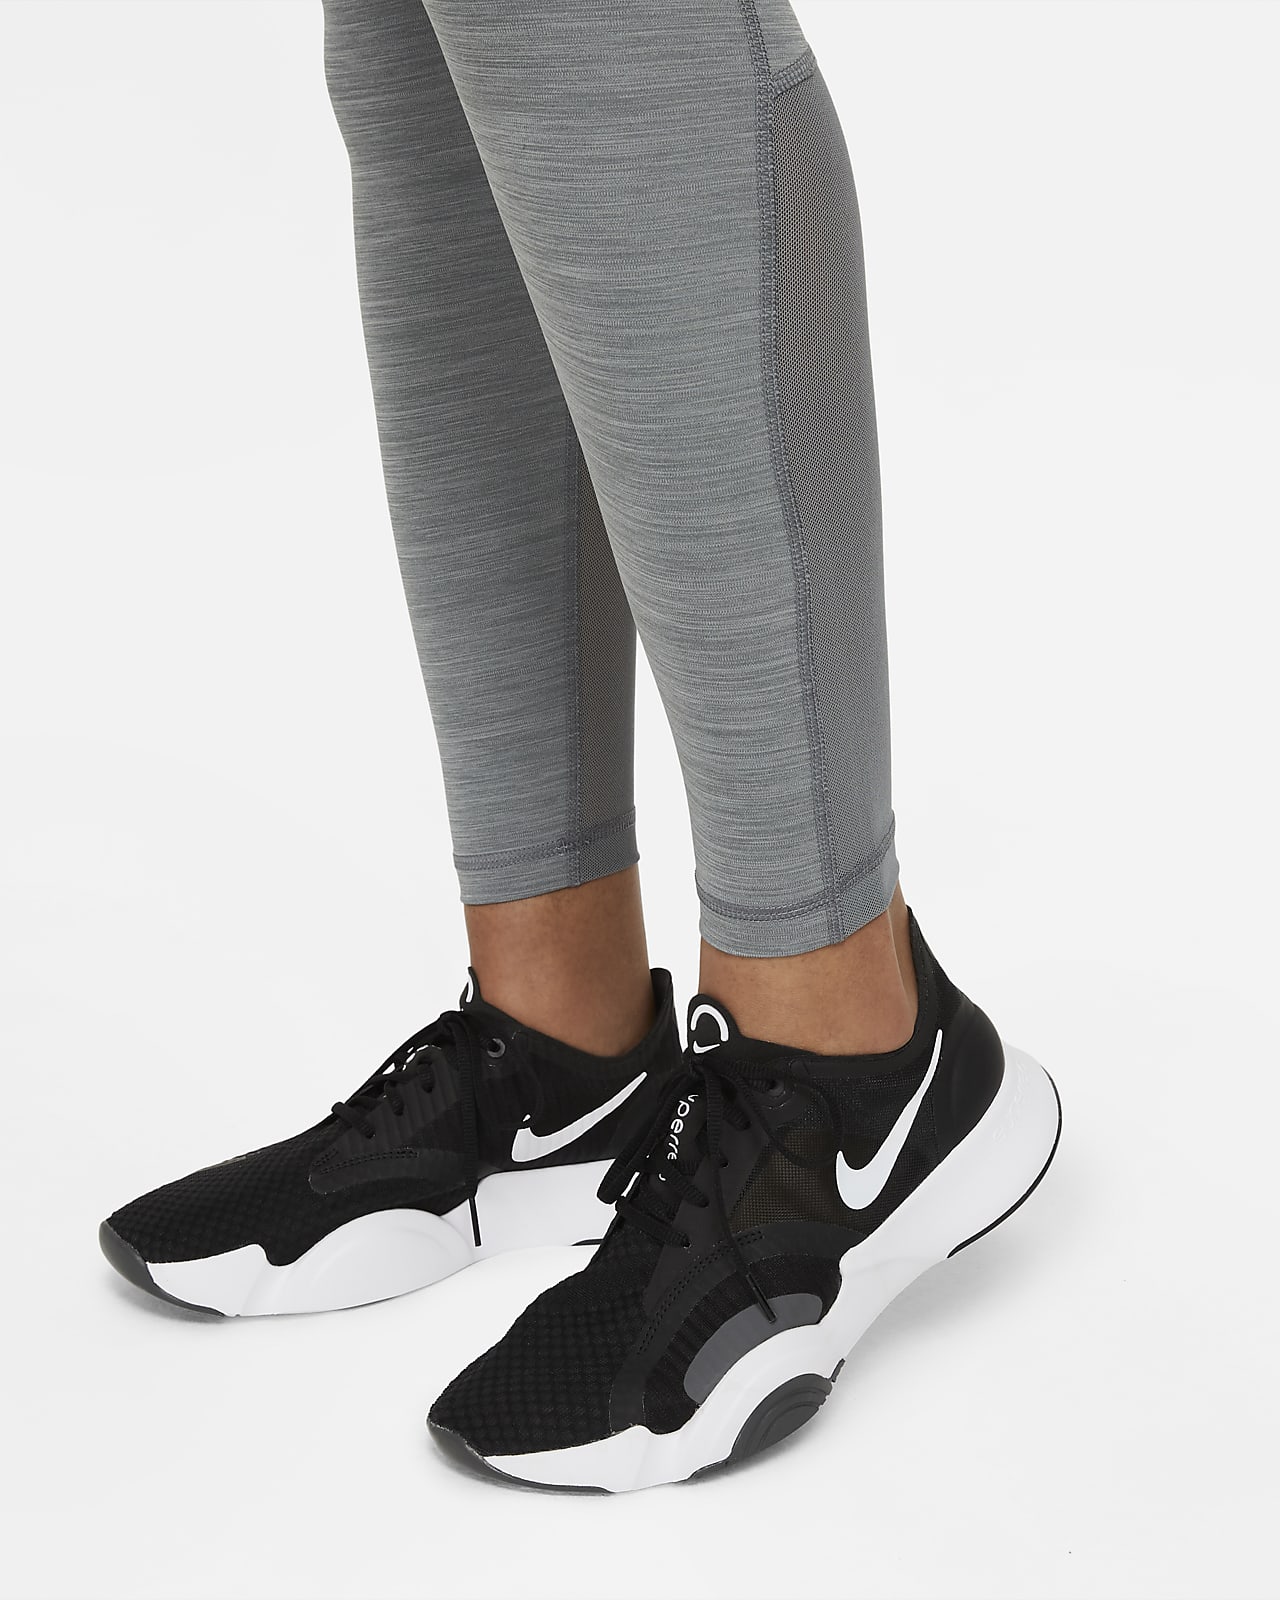 Nike - One Luxe Dri-FIT Mid-Rise Dance Leggings College Grey XL